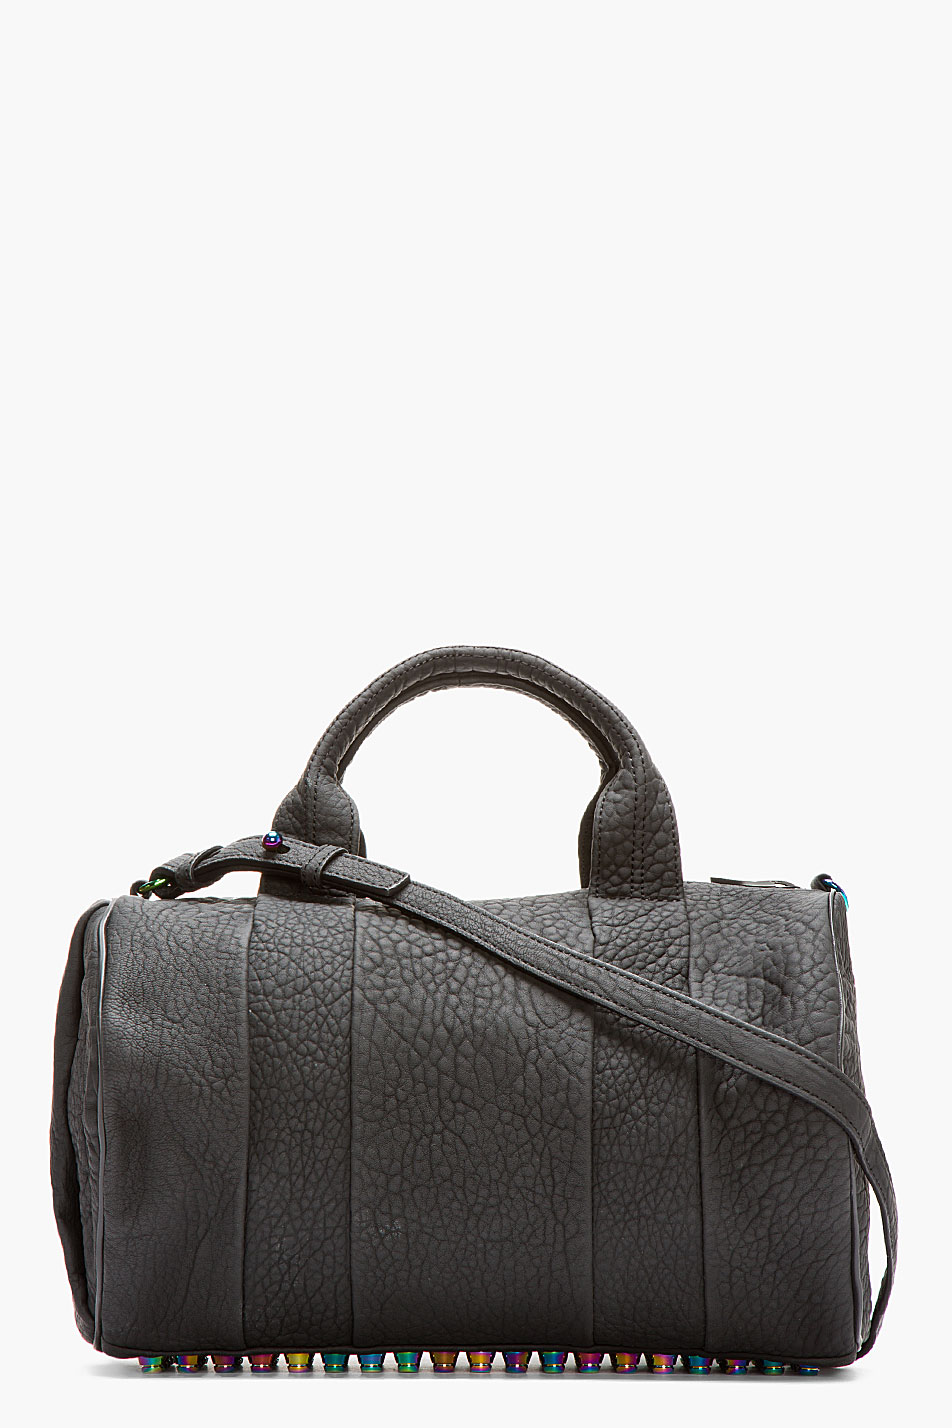 Alexander Wang Black Rubberized Leather Iridescent Rocco Duffle Bag in